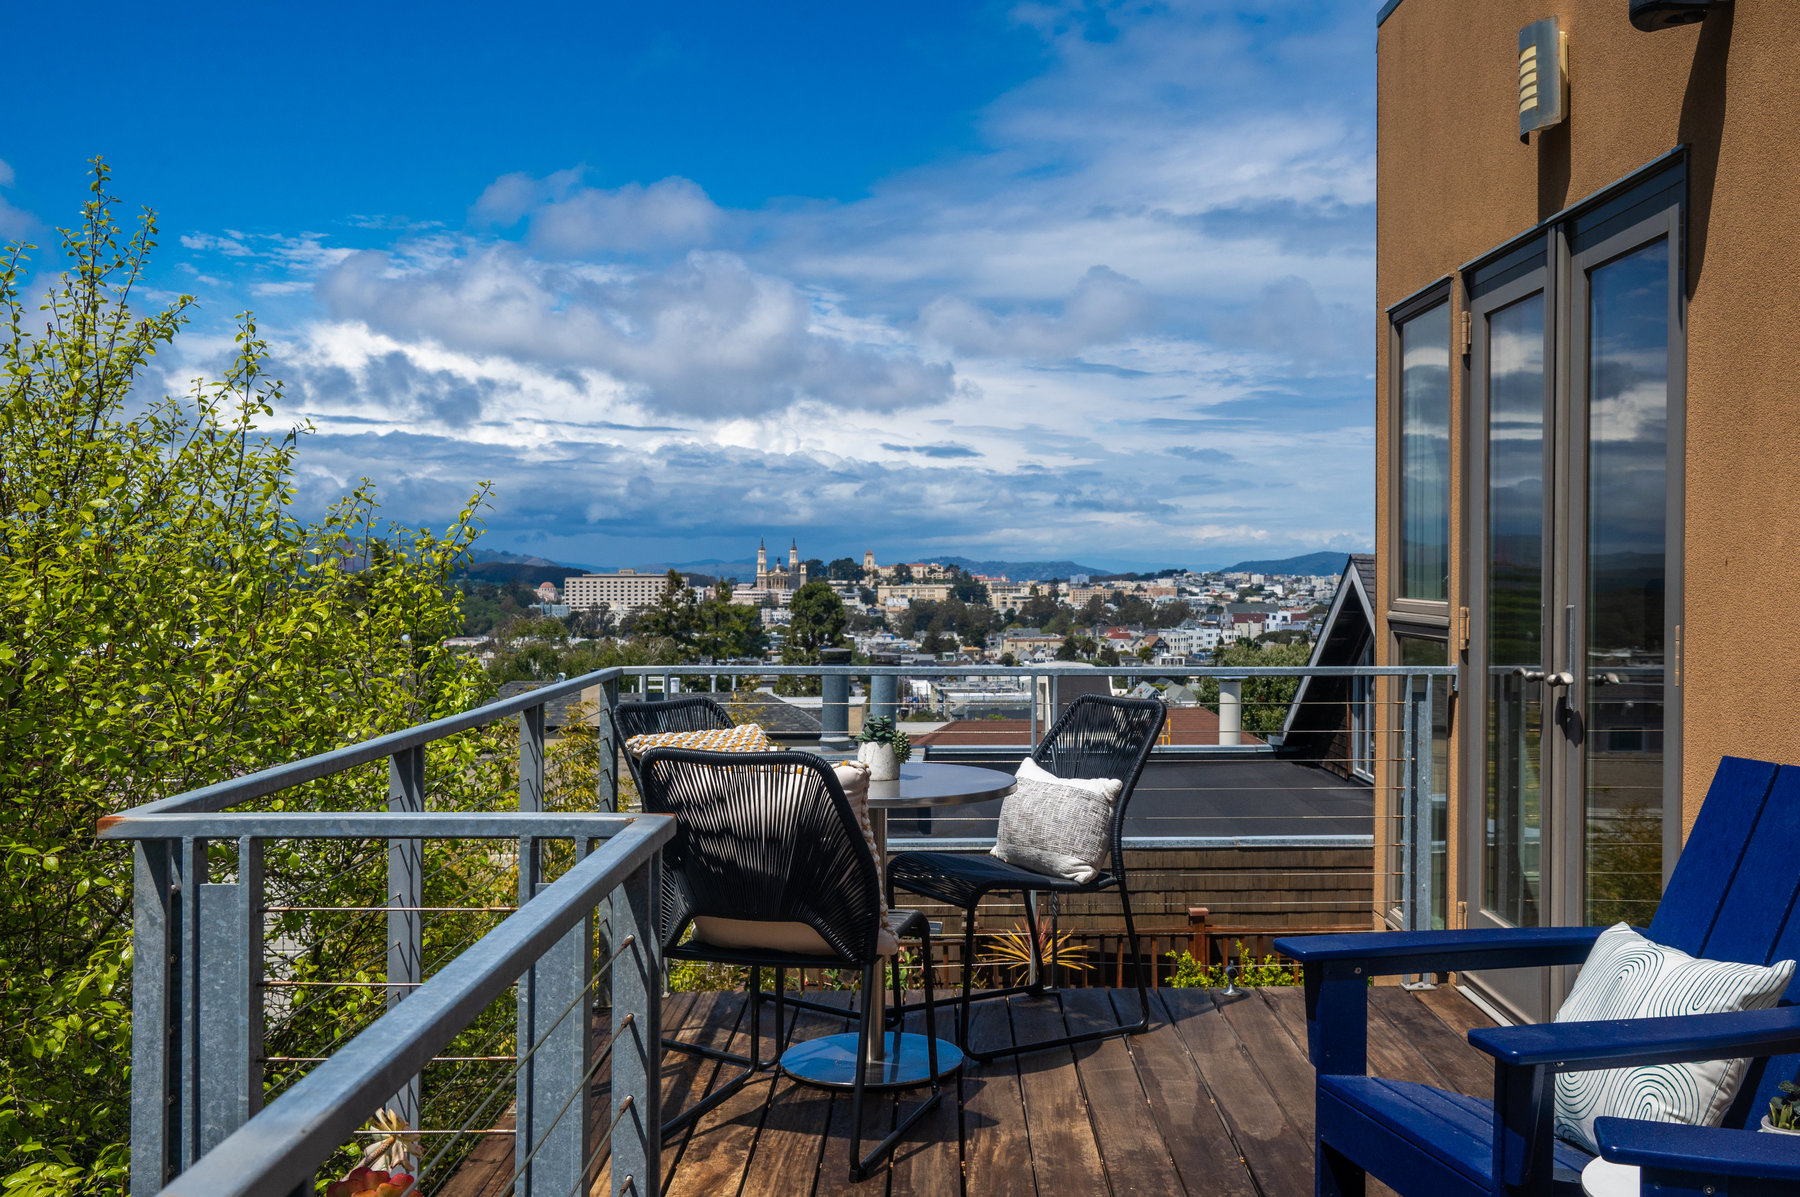 Property Photo: Beautiful view off the back deck. Greenery to the left and looking over cole valley.